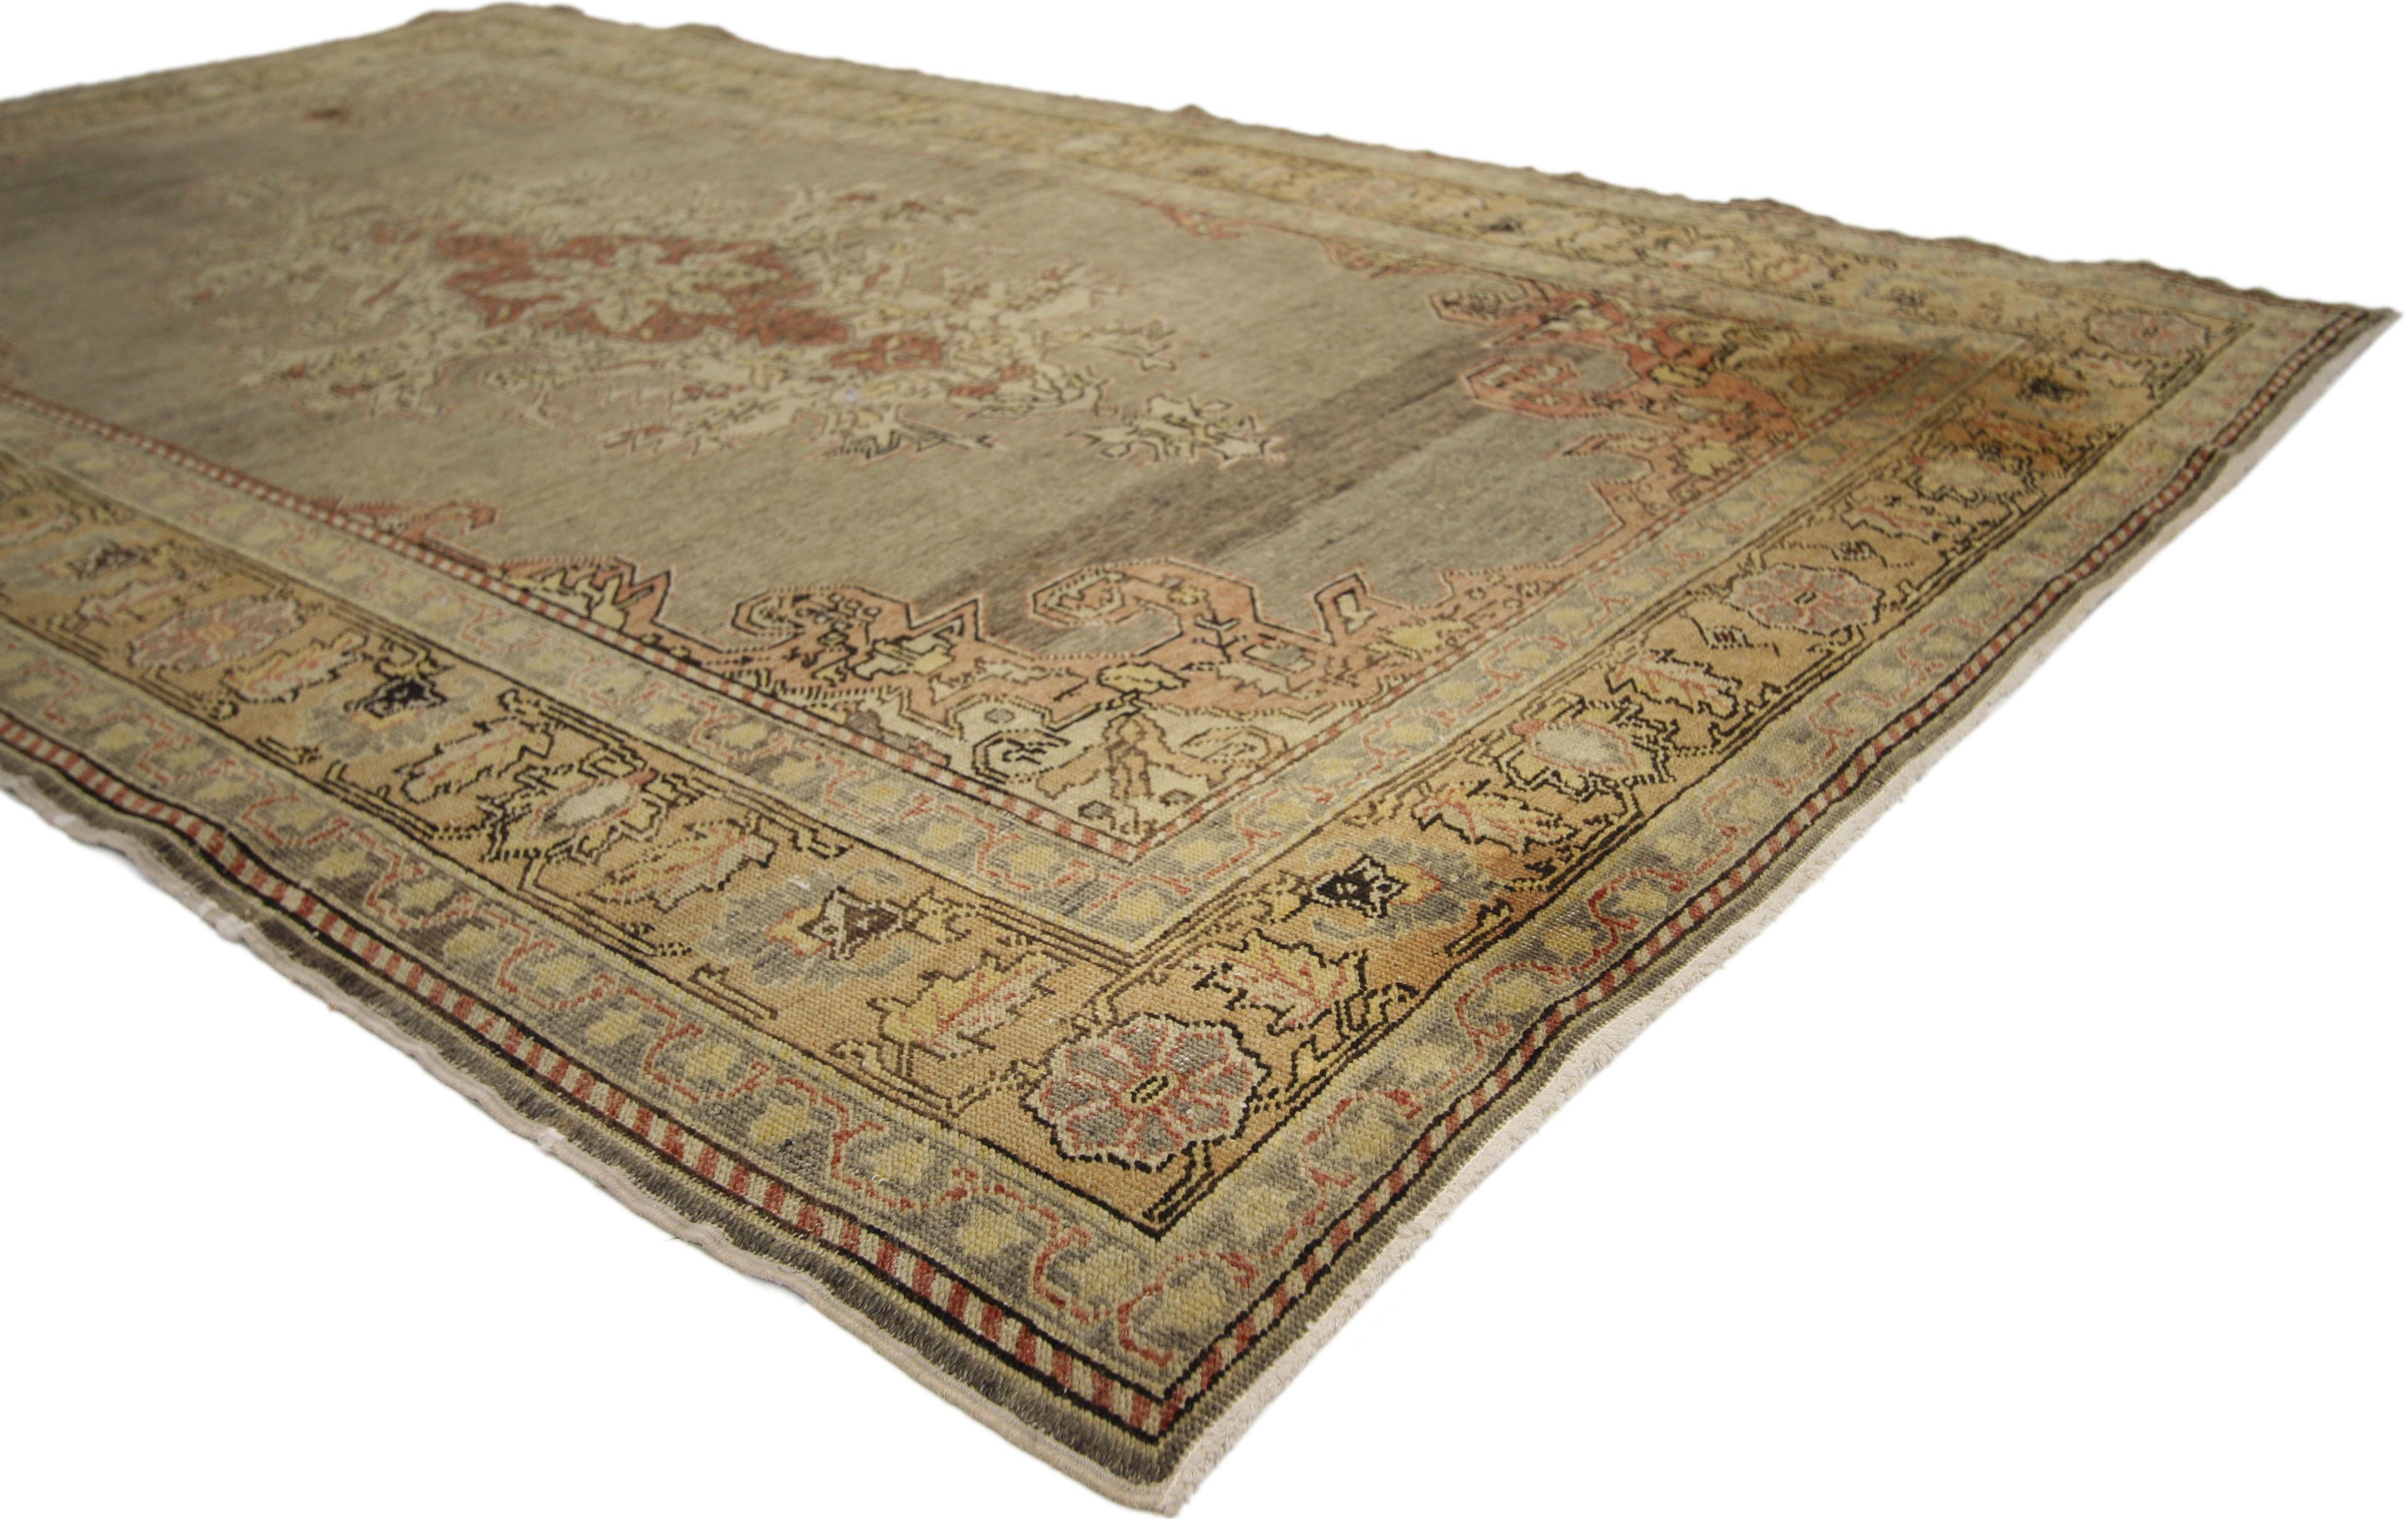 73742 Distressed Antique Turkish Sivas Rug 04'01 x 06'04. ​​​Warm and inviting with its, rugged beauty, this hand-knotted distressed antique Turkish Sivas rug is poised to impress. The lovingly time-worn gray hued field features a central medallion